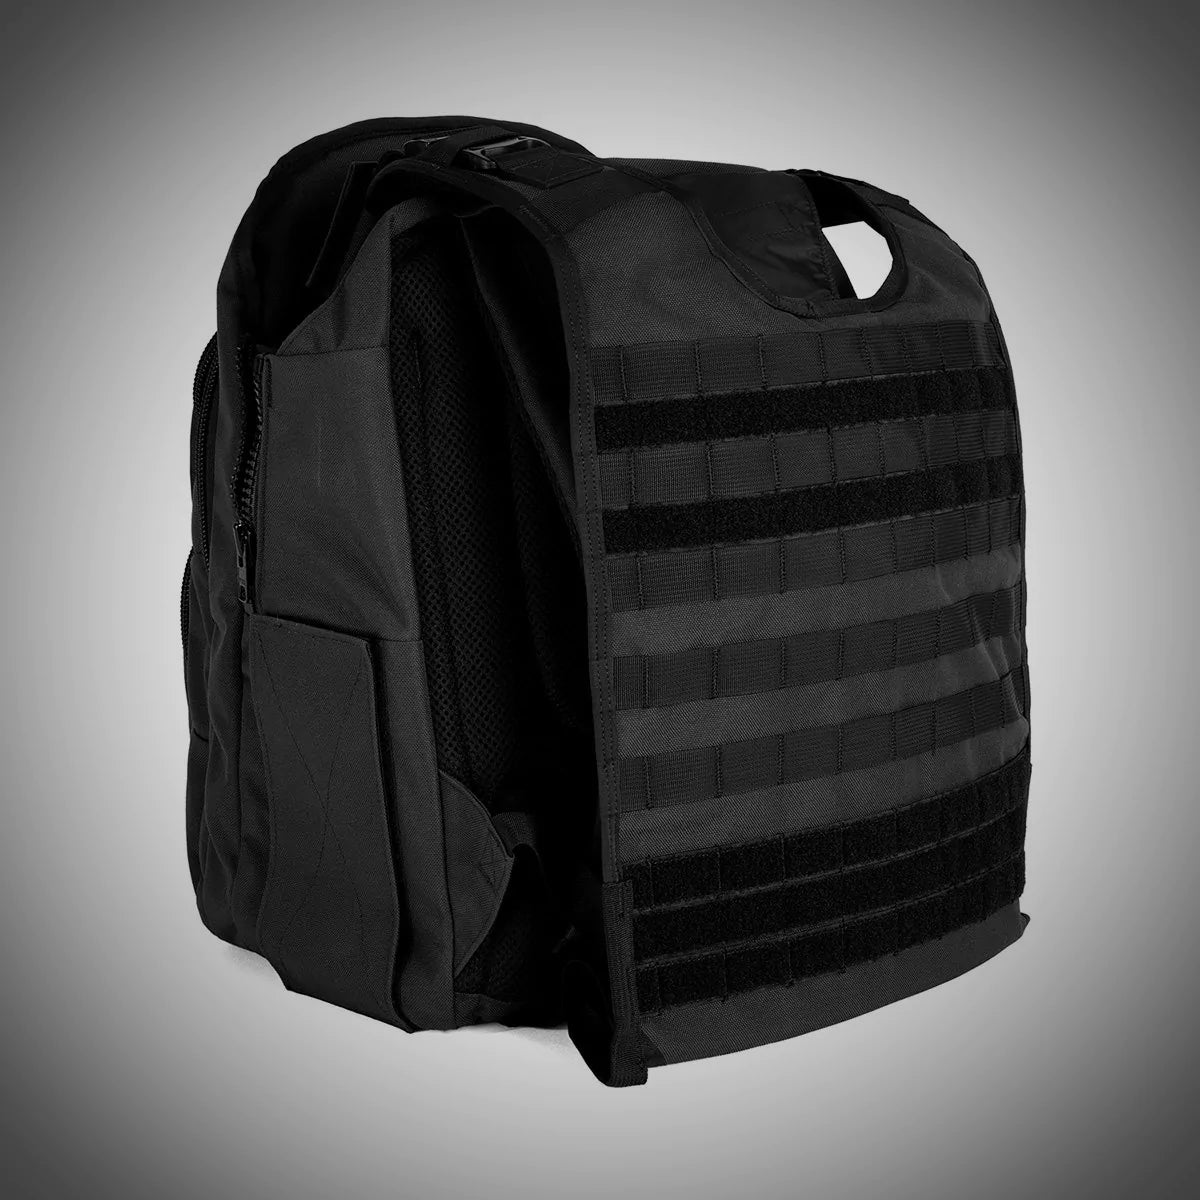 Gray Man Ballistipac Bullet Proof Tactical Backpacks (Backpack Only, Body Armor Sold Separately)